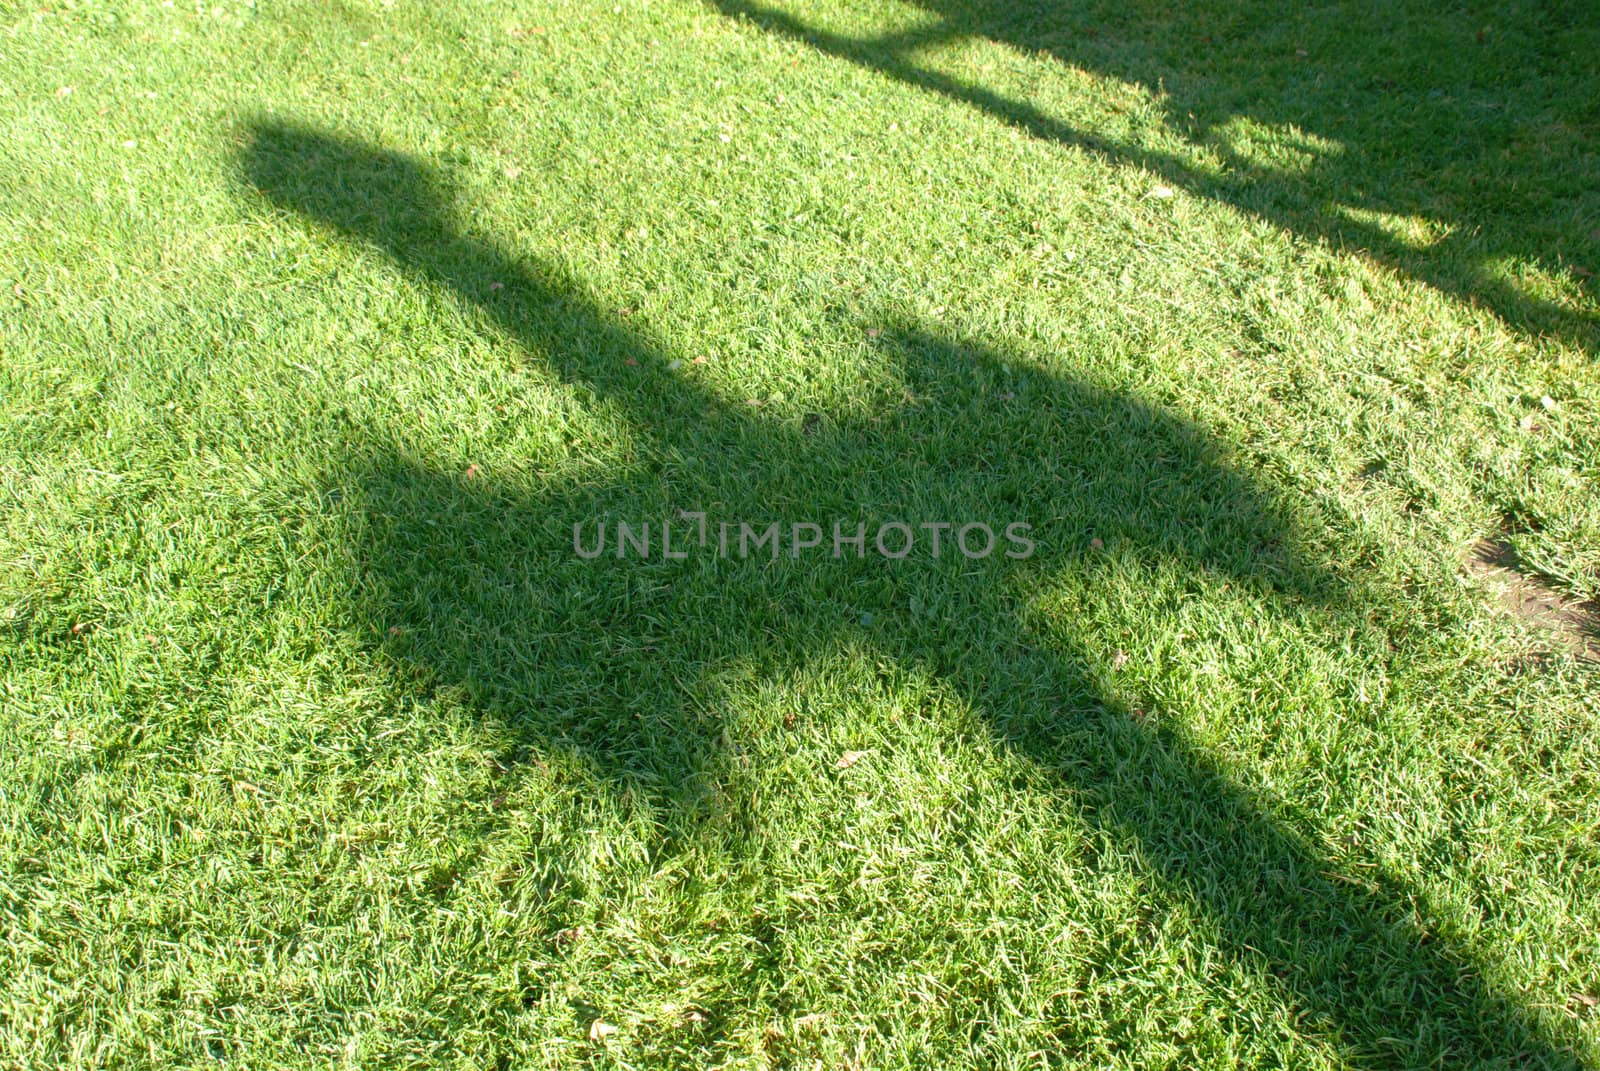 Warm long shadow of the cross fall into the green grass